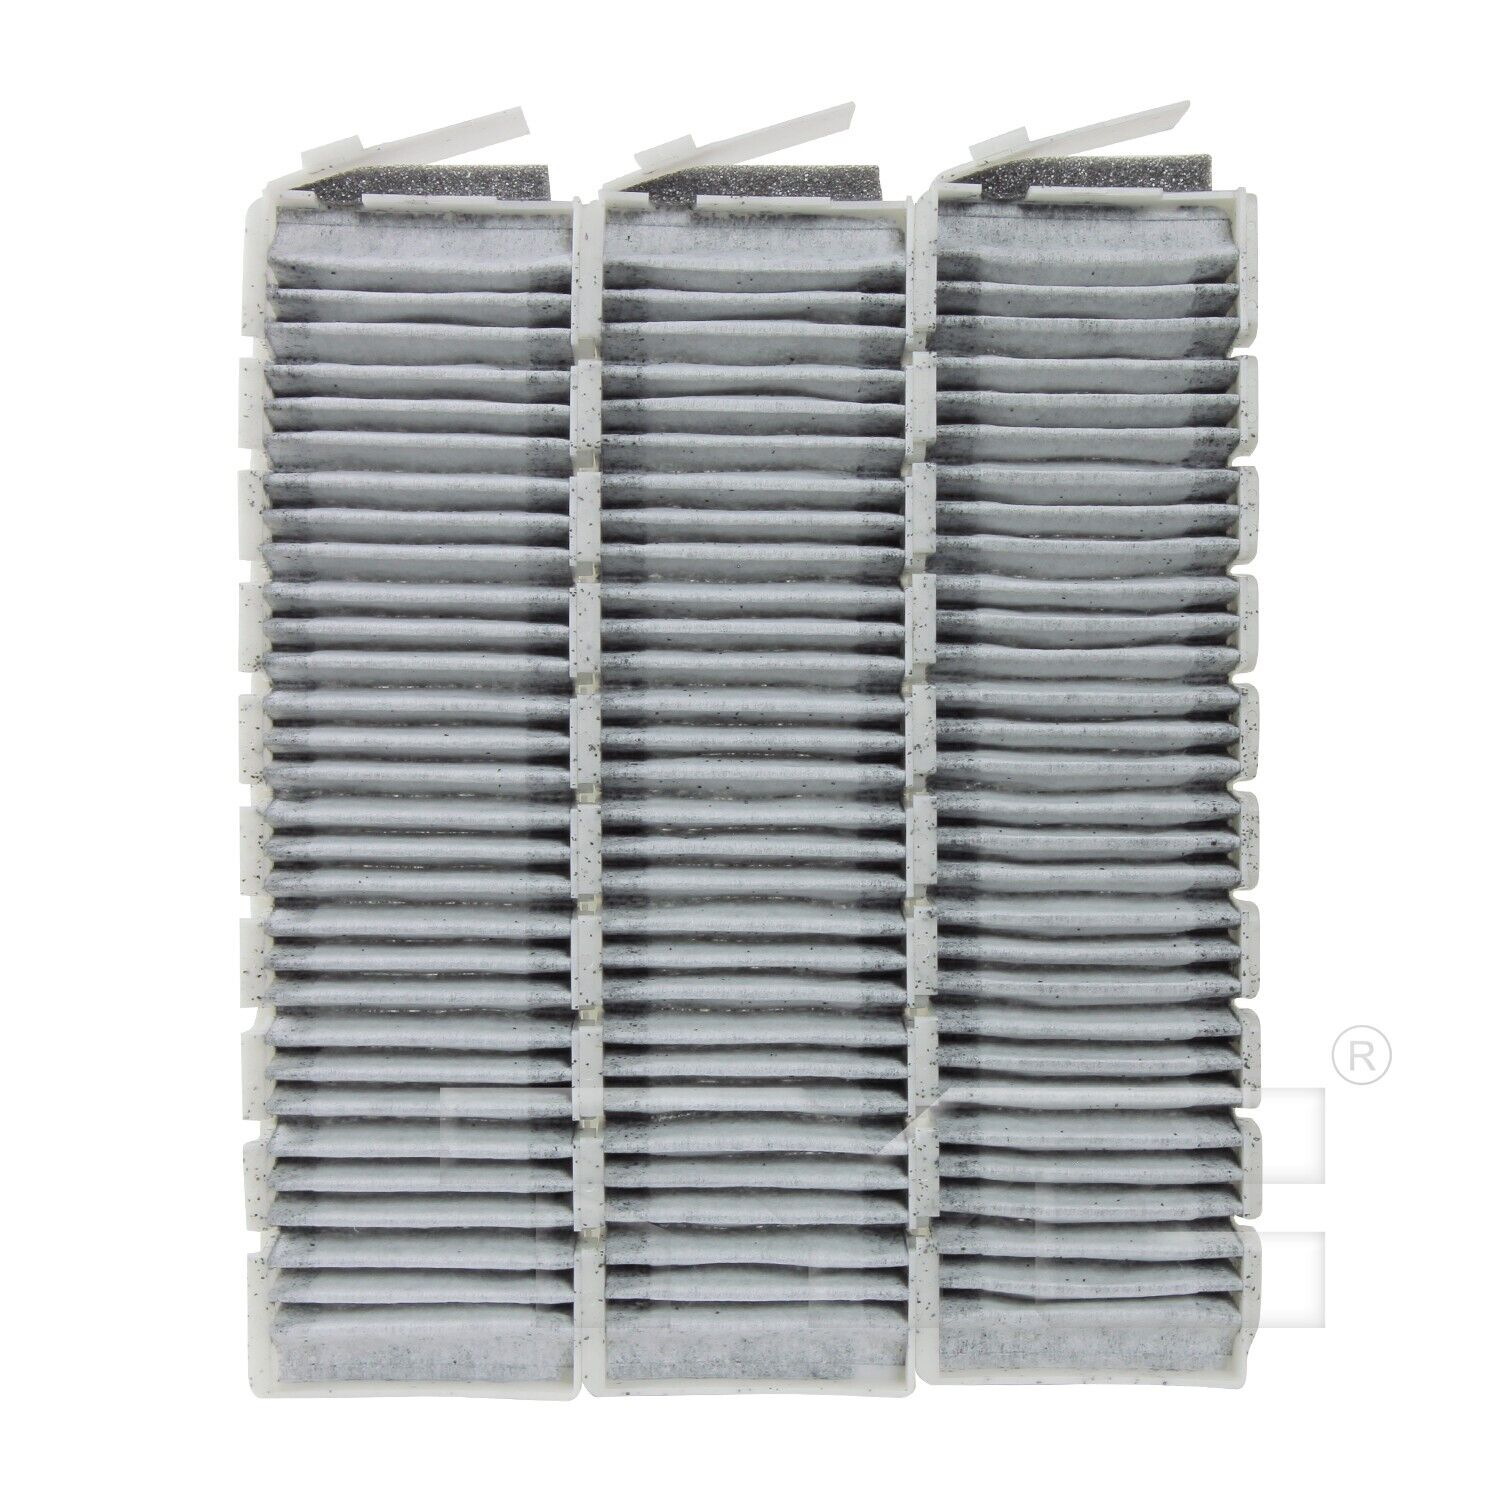 TYC Cabin Air Filter for Park Avenue, Seville 800090C3